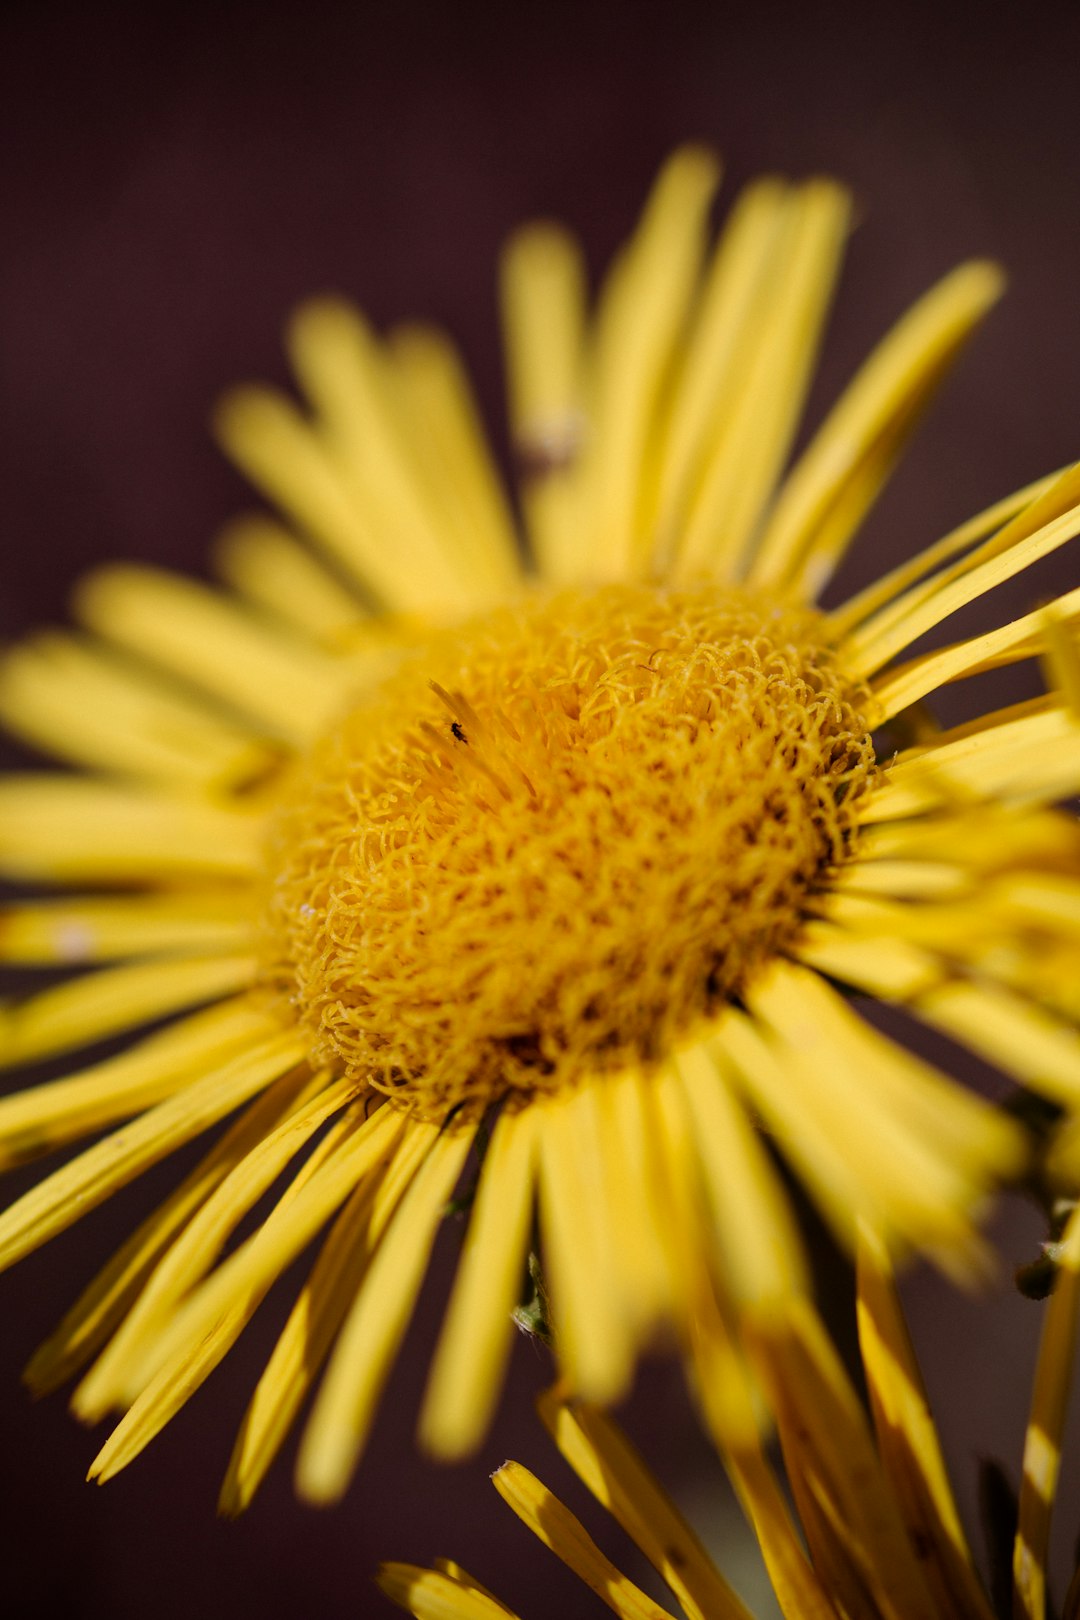 yellow daisy in bloom close up photo